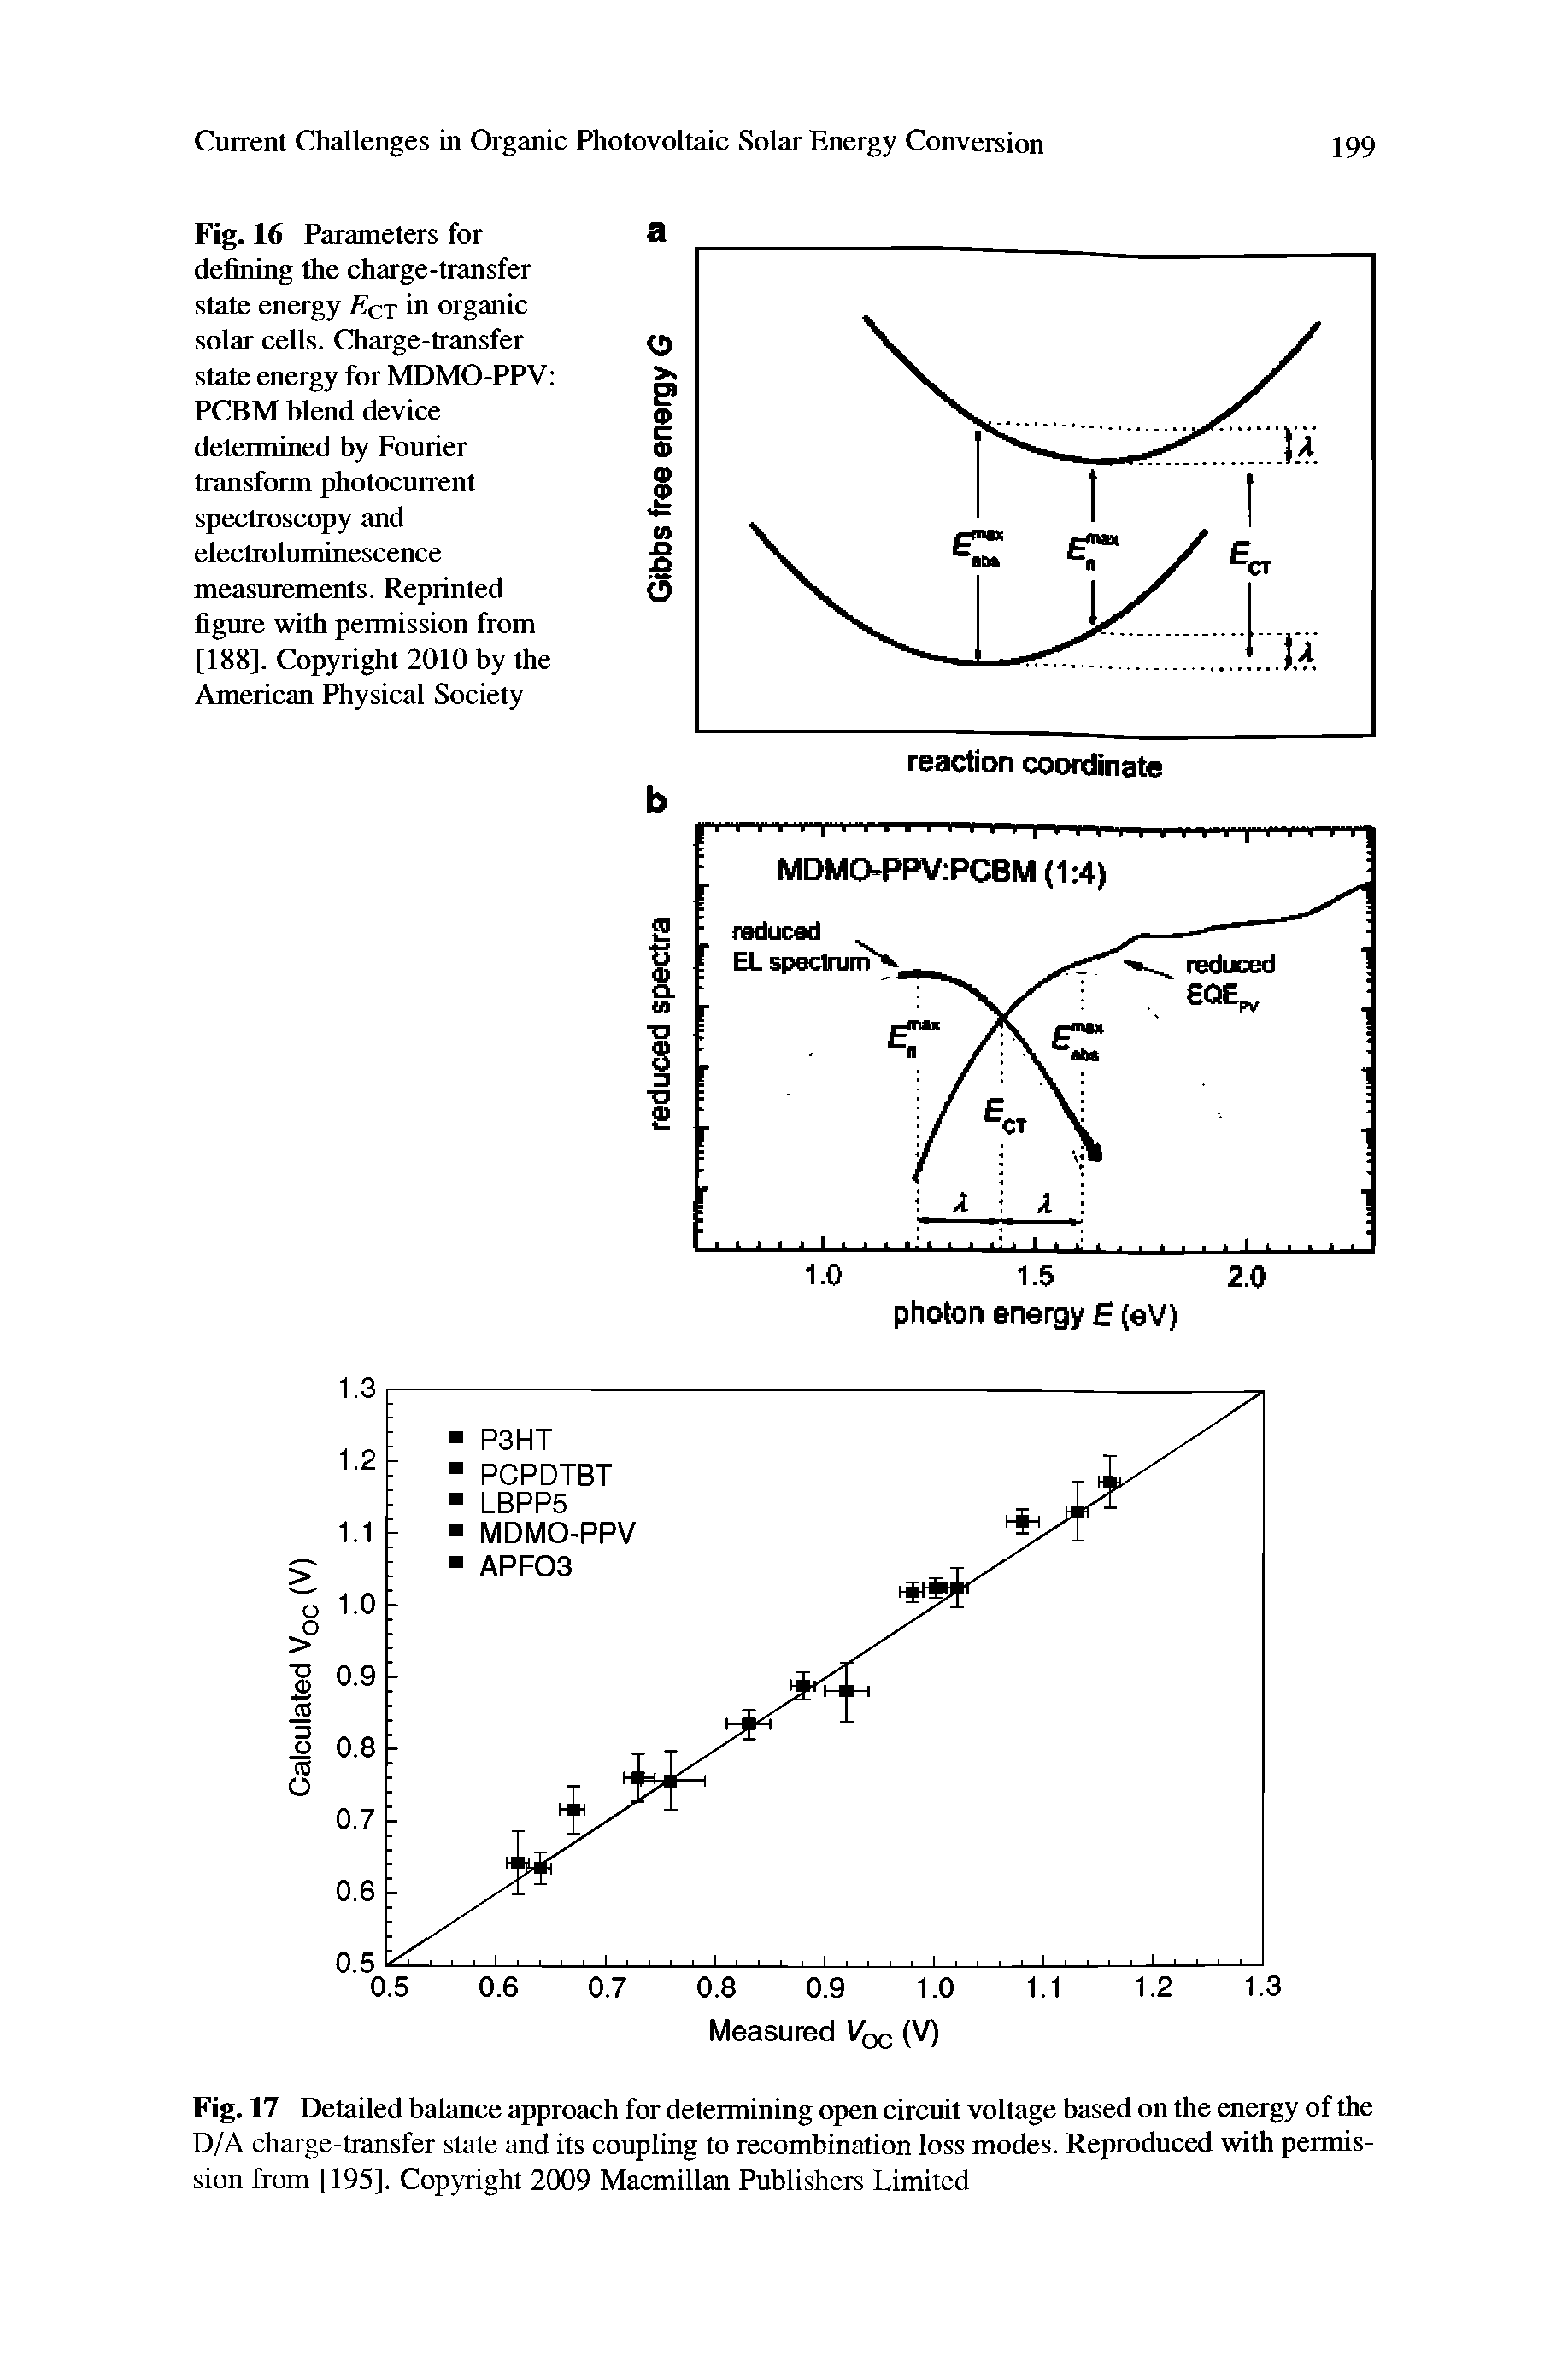 Fig. 16 Parameters for defining the charge-transfer state energy cx in organic solar cells. Charge-transfer state energy for MDMO-PPV PCBM blend device determined by Fourier transform photocurrent spectroscopy and electroluminescence measurements. Reprinted figure with permission from [188]. Copyright 2010 by the American Physical Society...